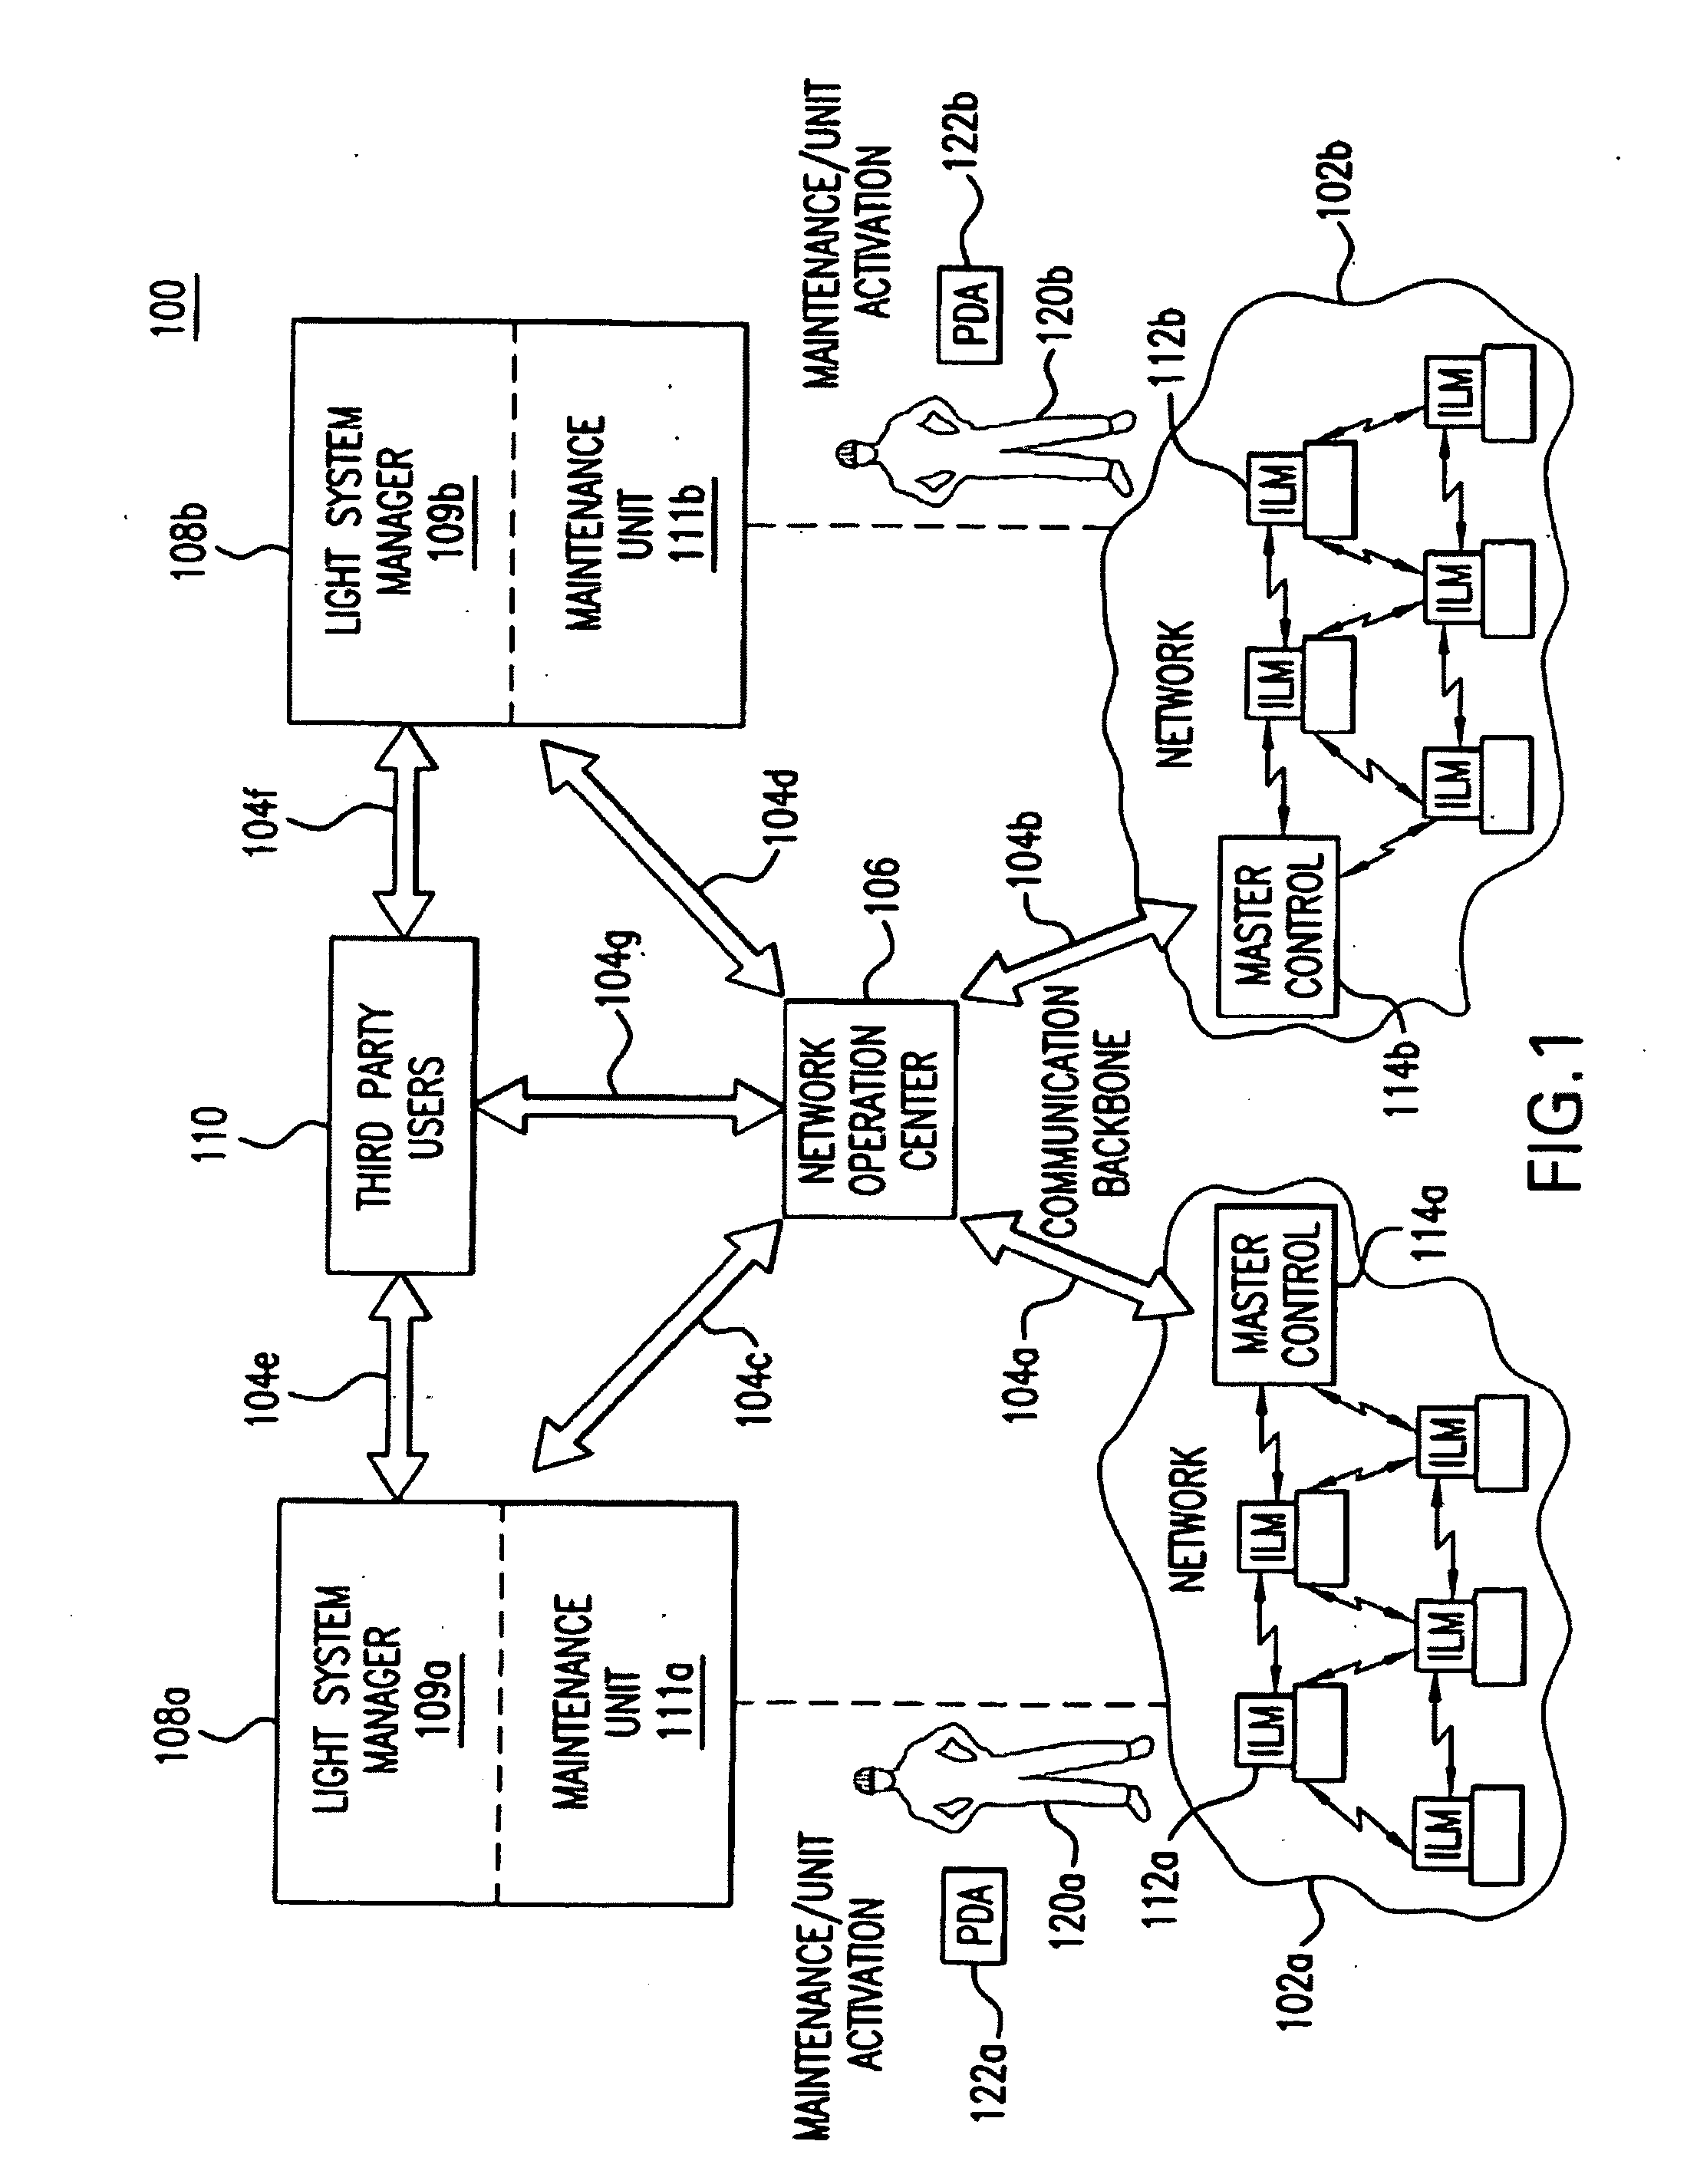 System and method for streetlight monitoring diagnostics